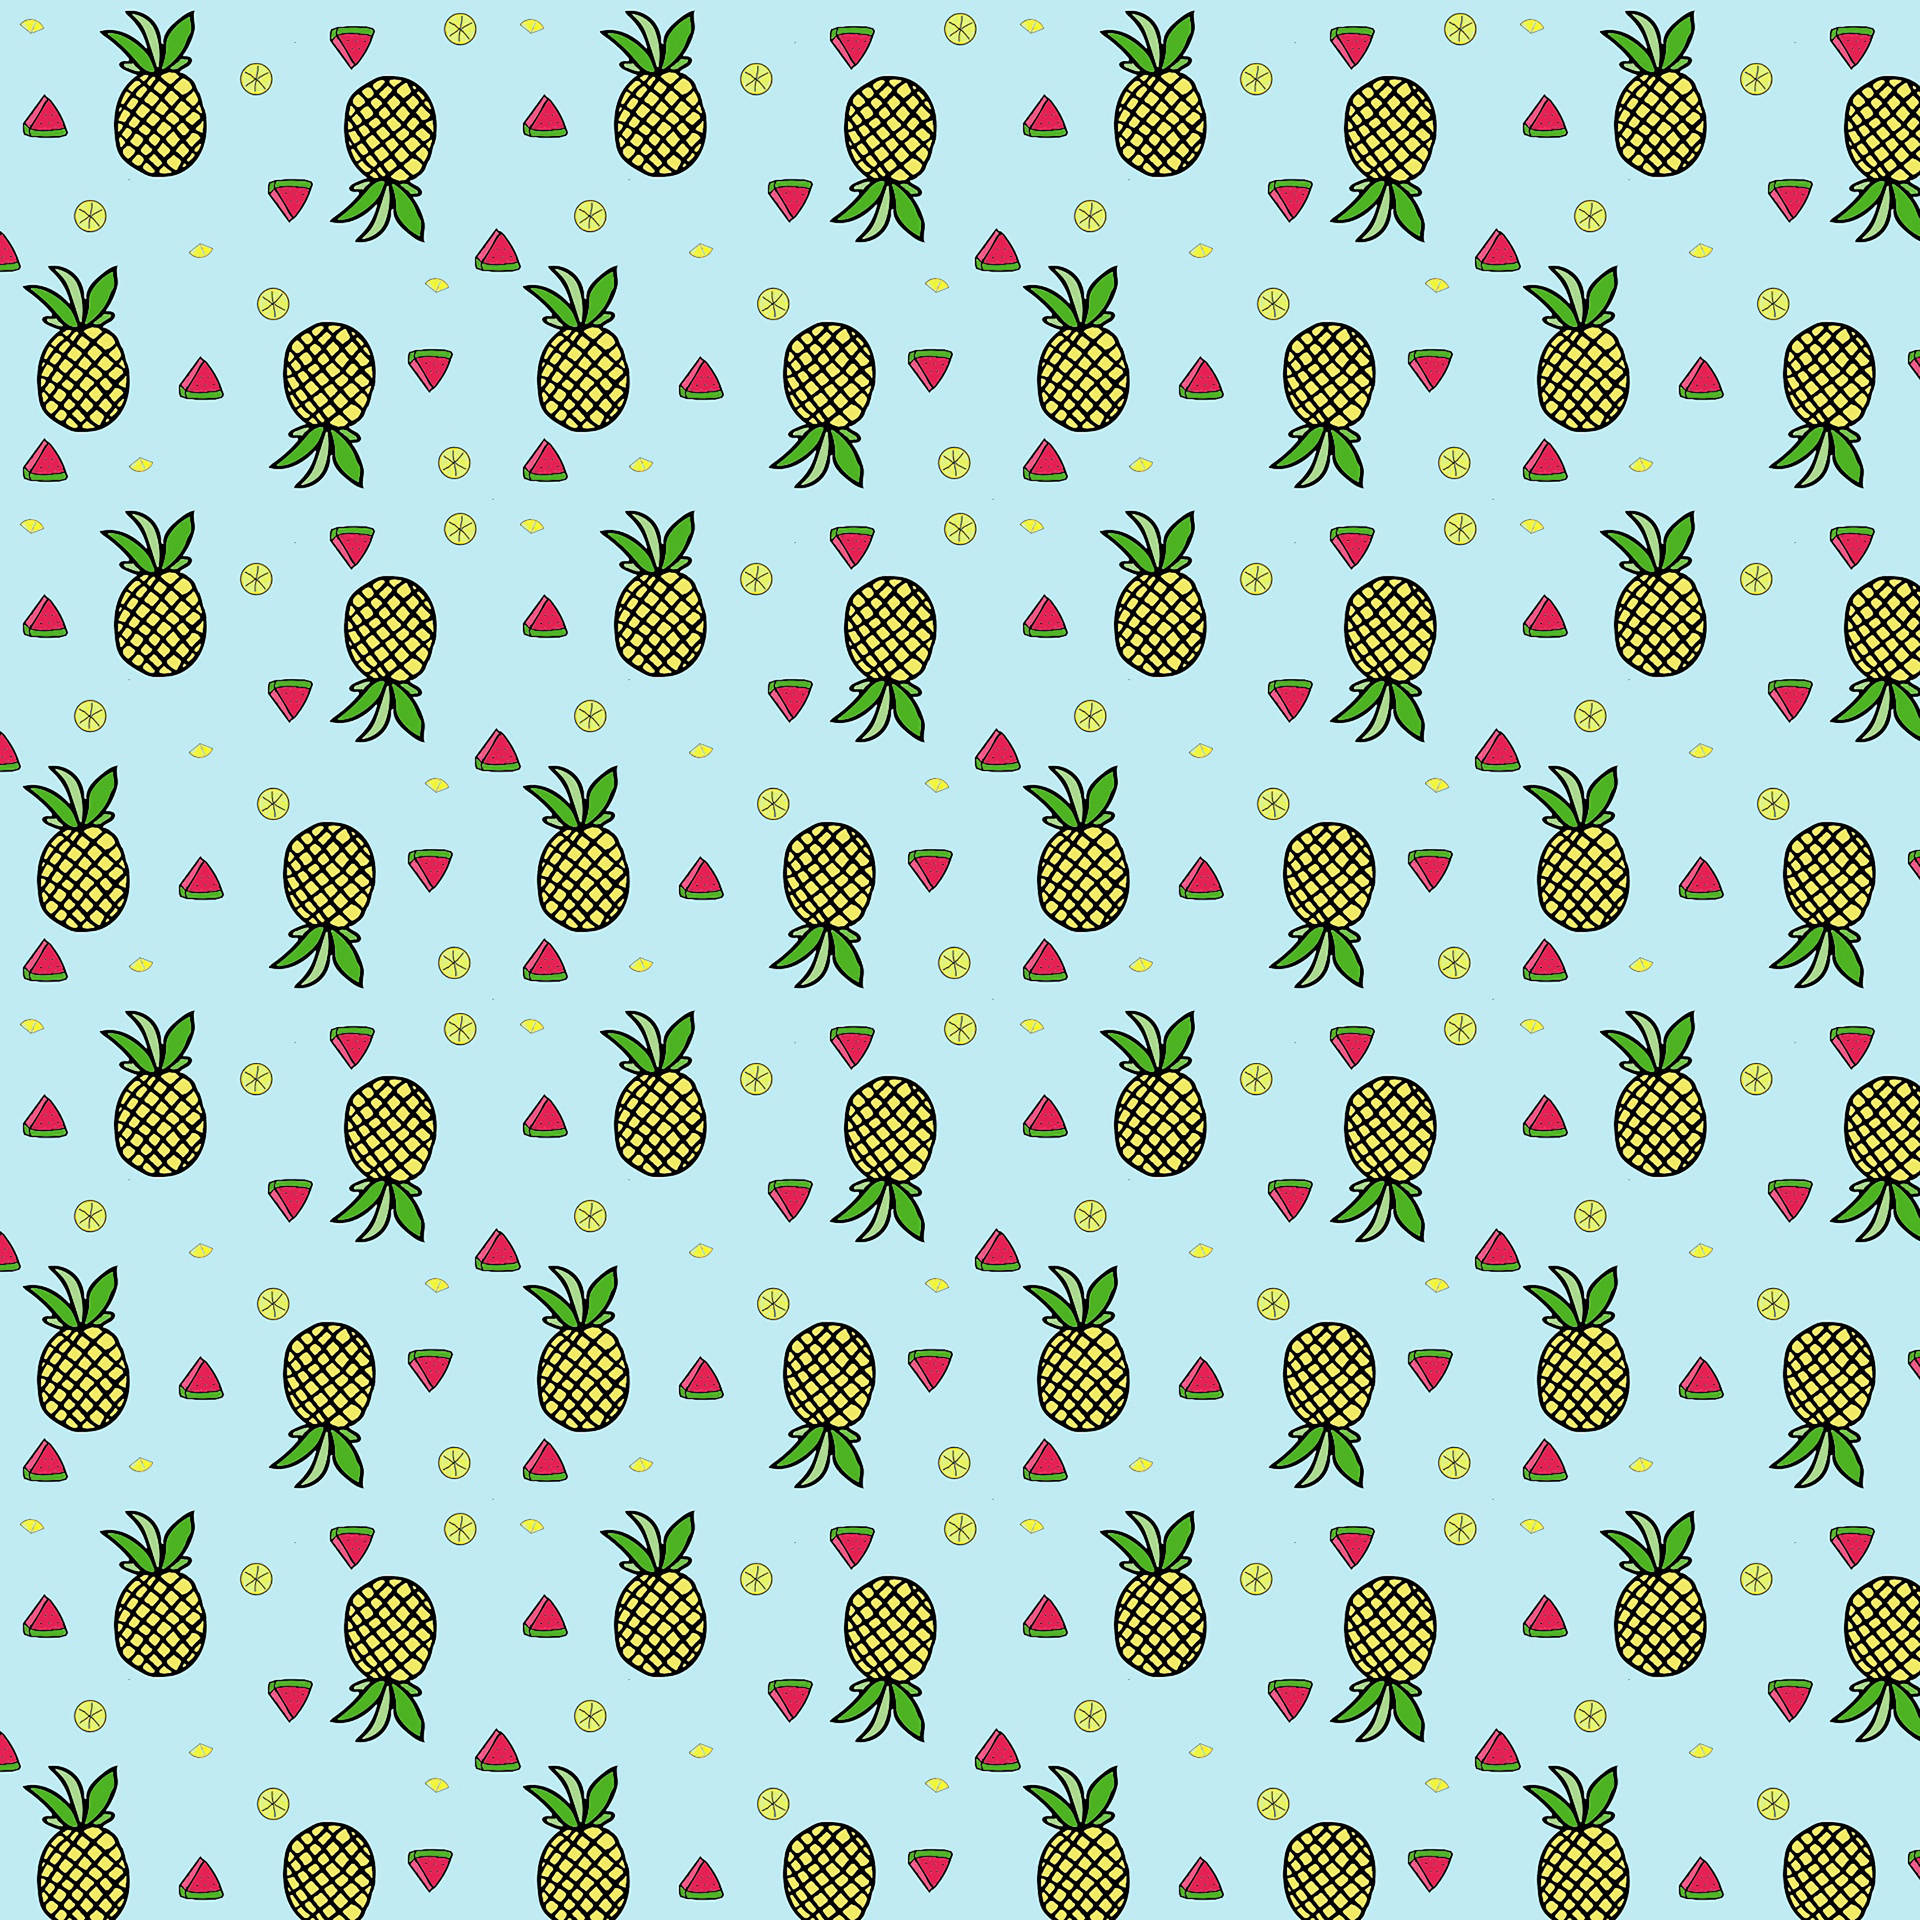 Refreshing Pineapple and Fruits Pattern Wallpaper